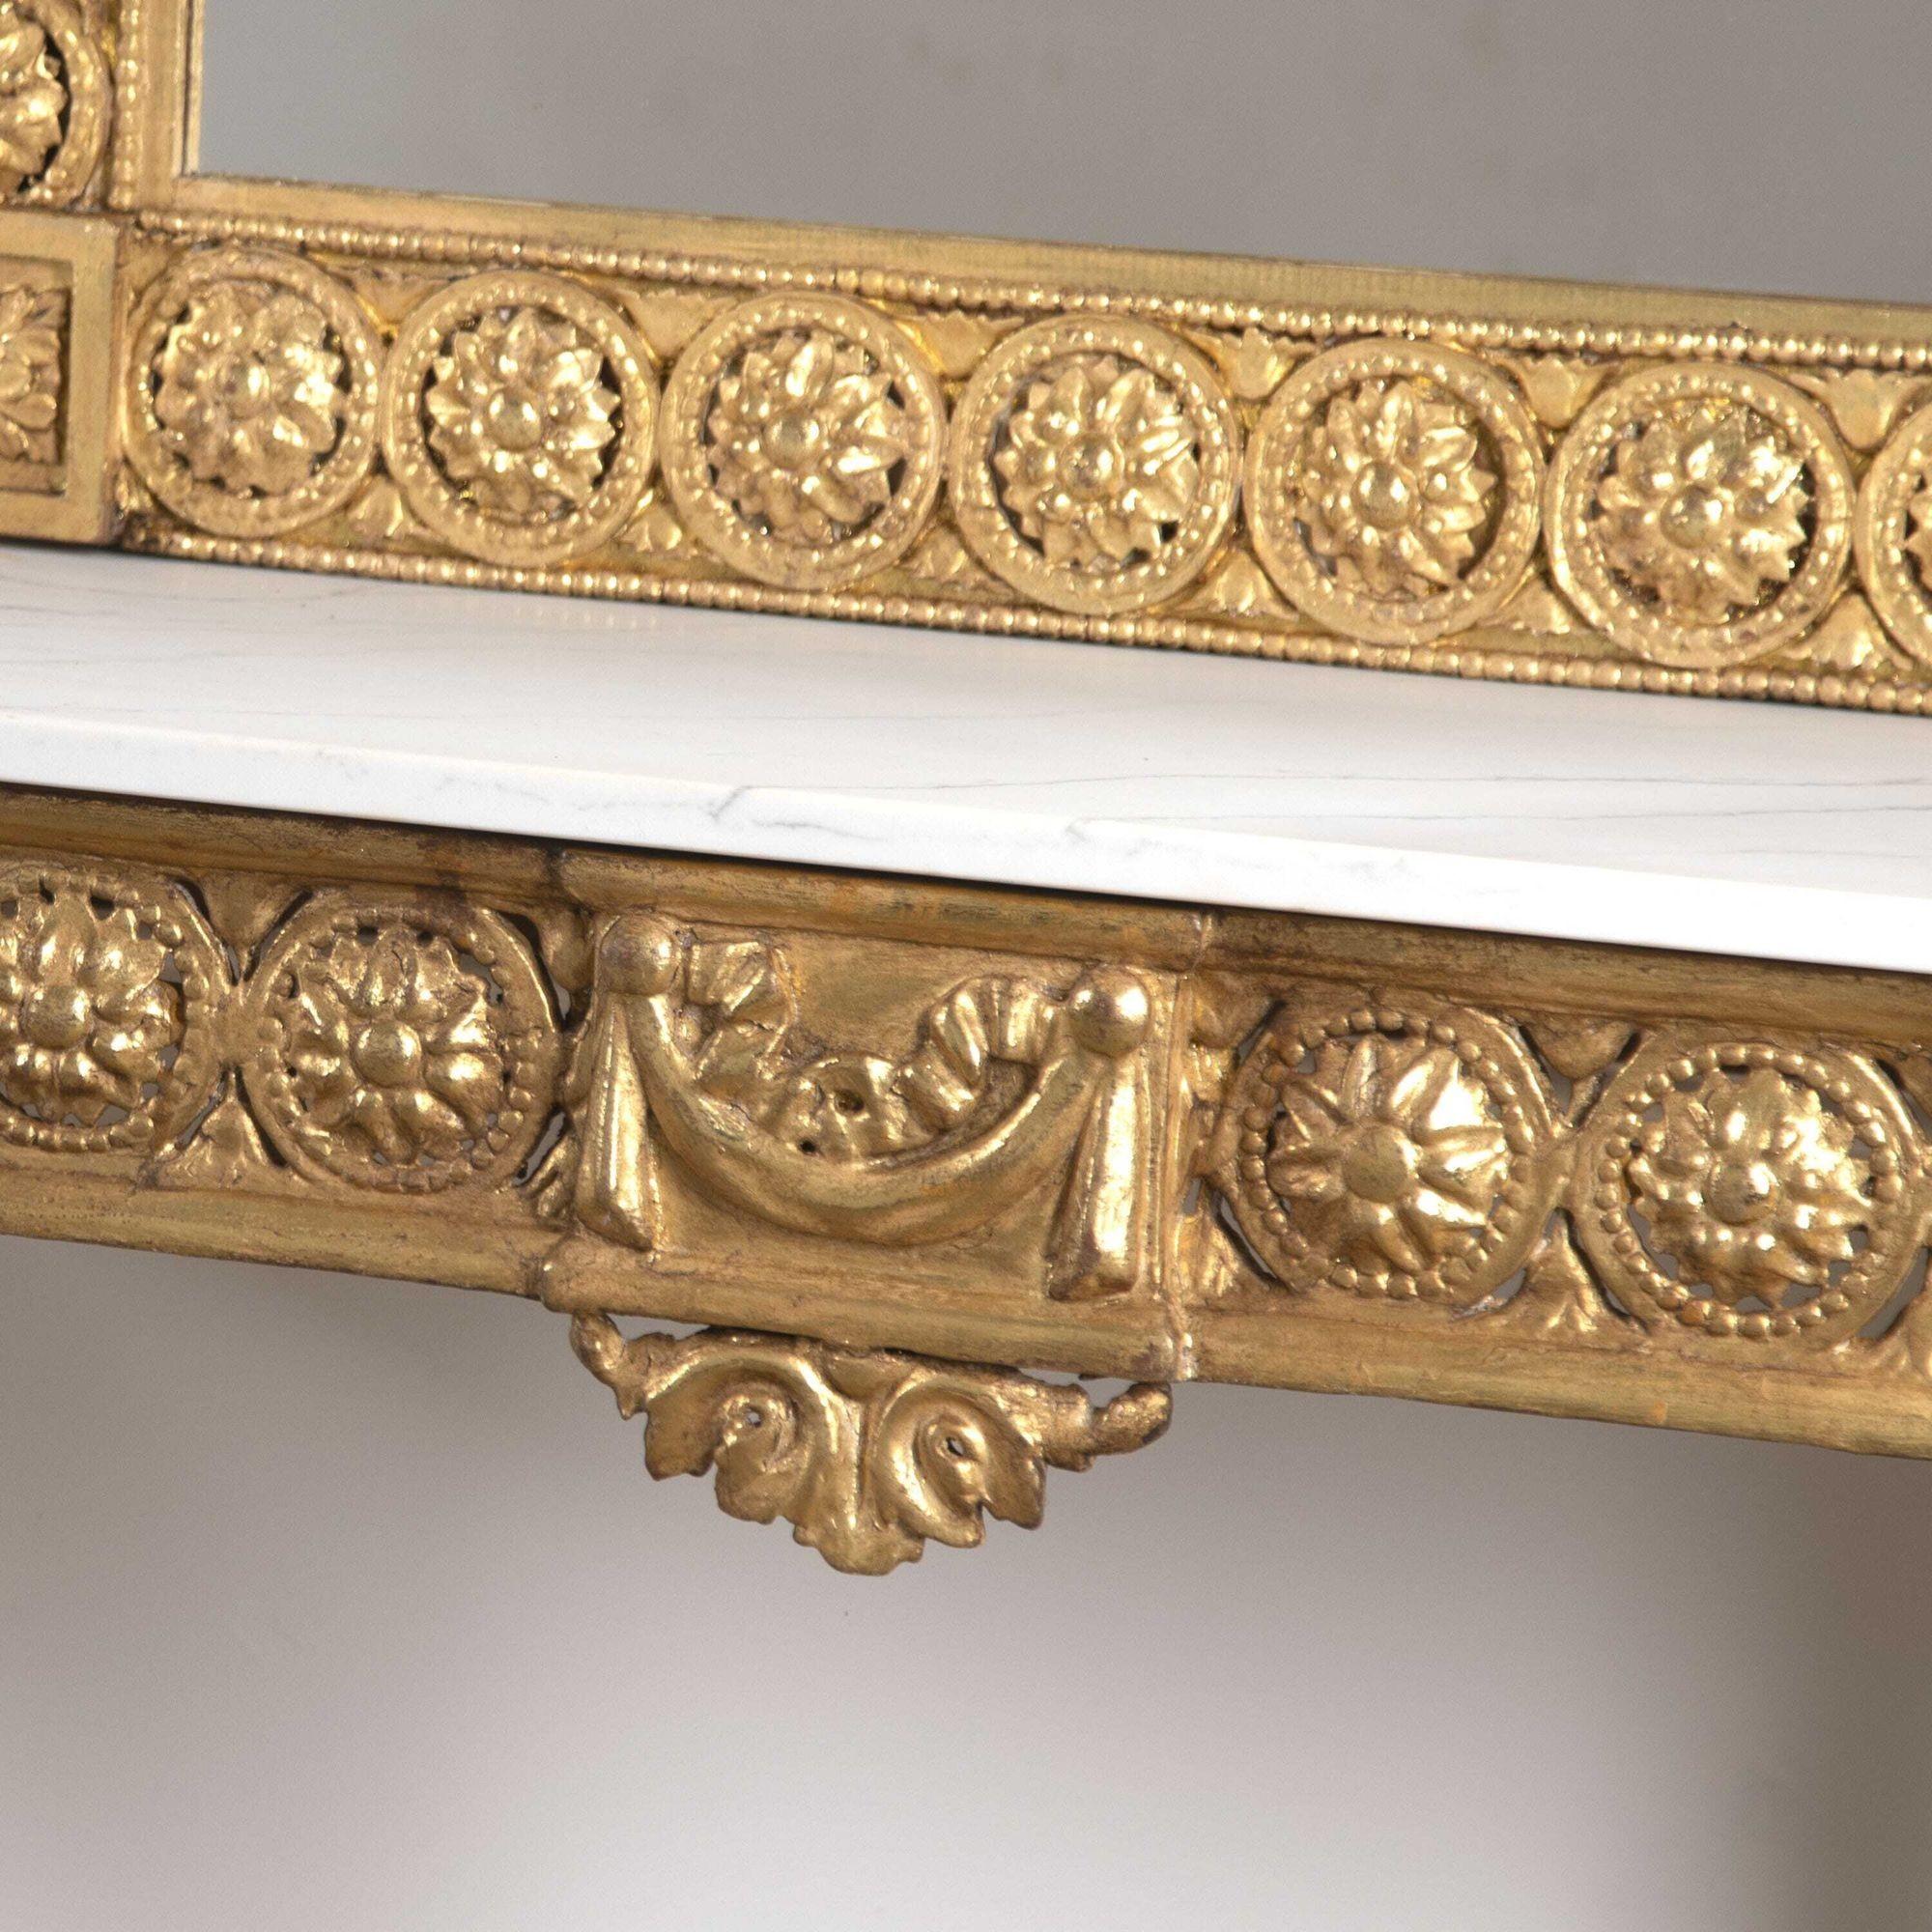 Fantastic pair of 19th Century gilt console tables with gilt mirrors of impressive form and size.
These decorative pieces have been brought back to life after the console tables were found in a poor condition with their marble tops broken. Both